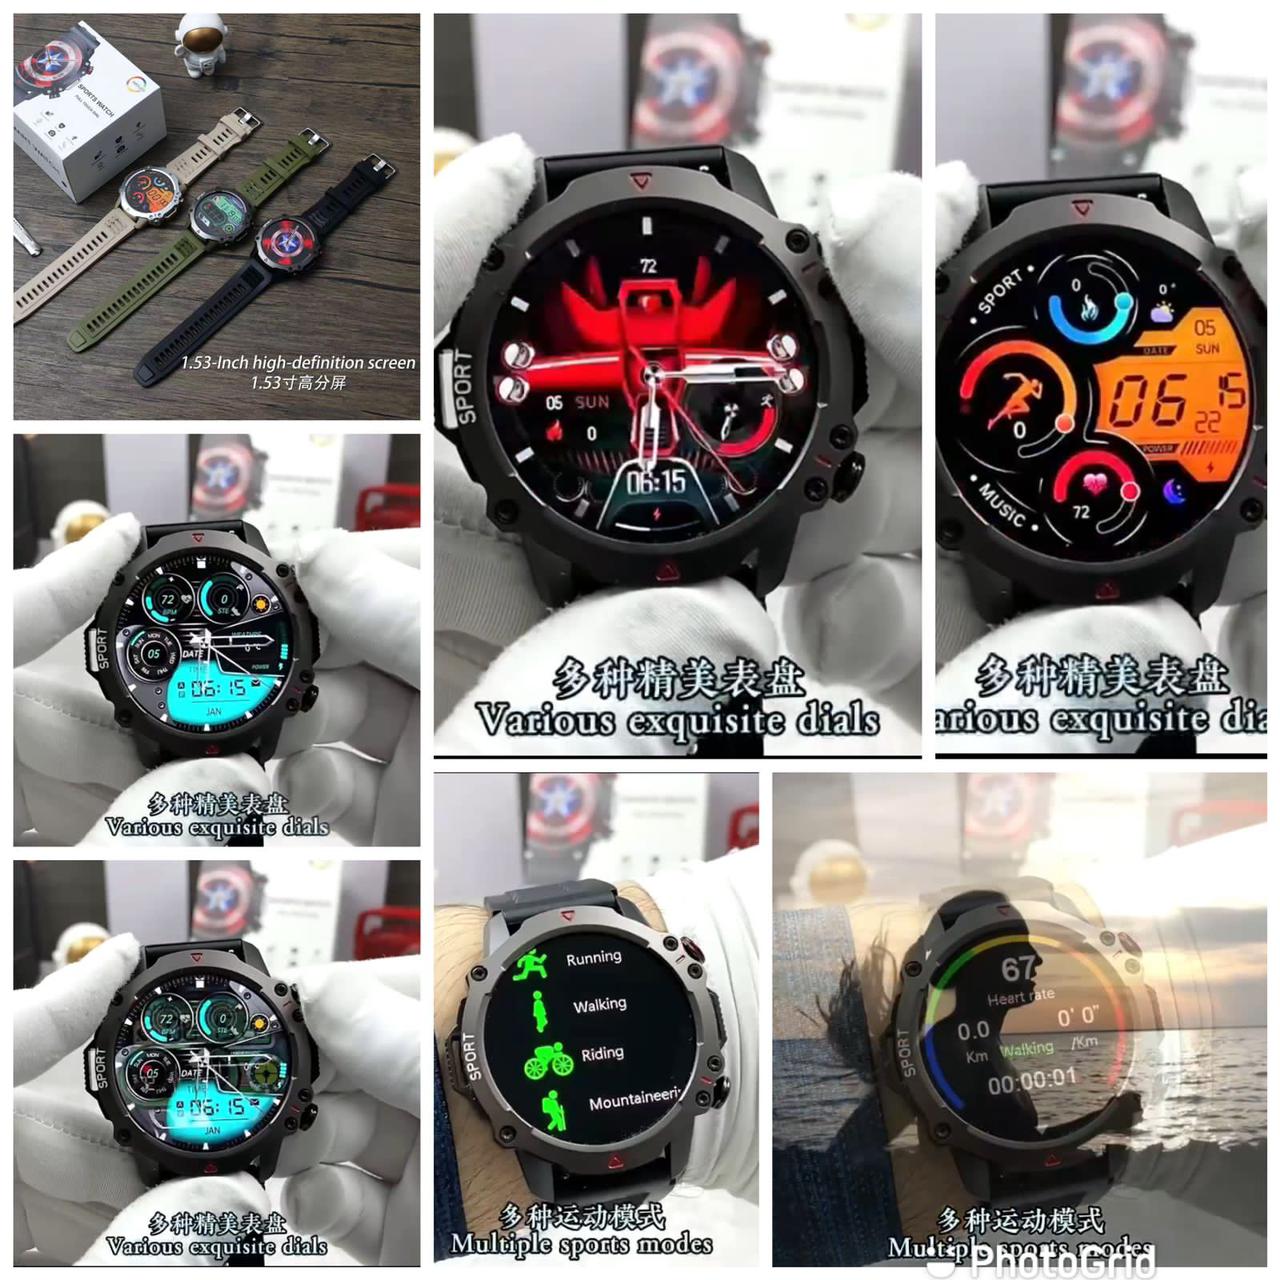 Avengers Edition Smartwatch On Sale